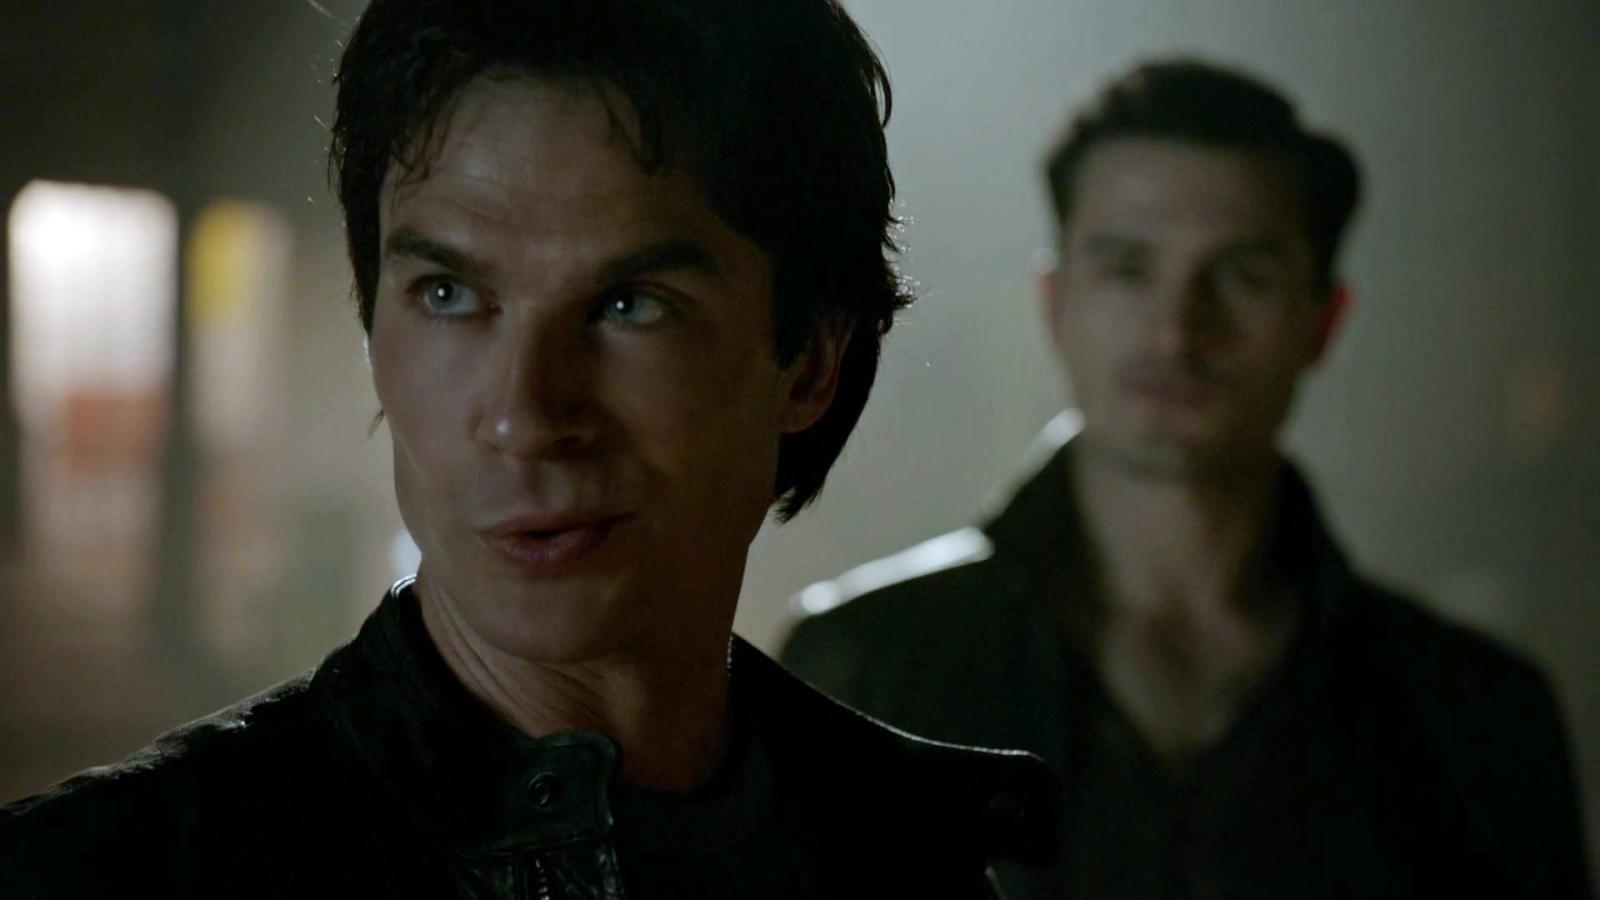 8 Vampire Diaries Episodes With the Most Shocking Cliffhangers - image 8